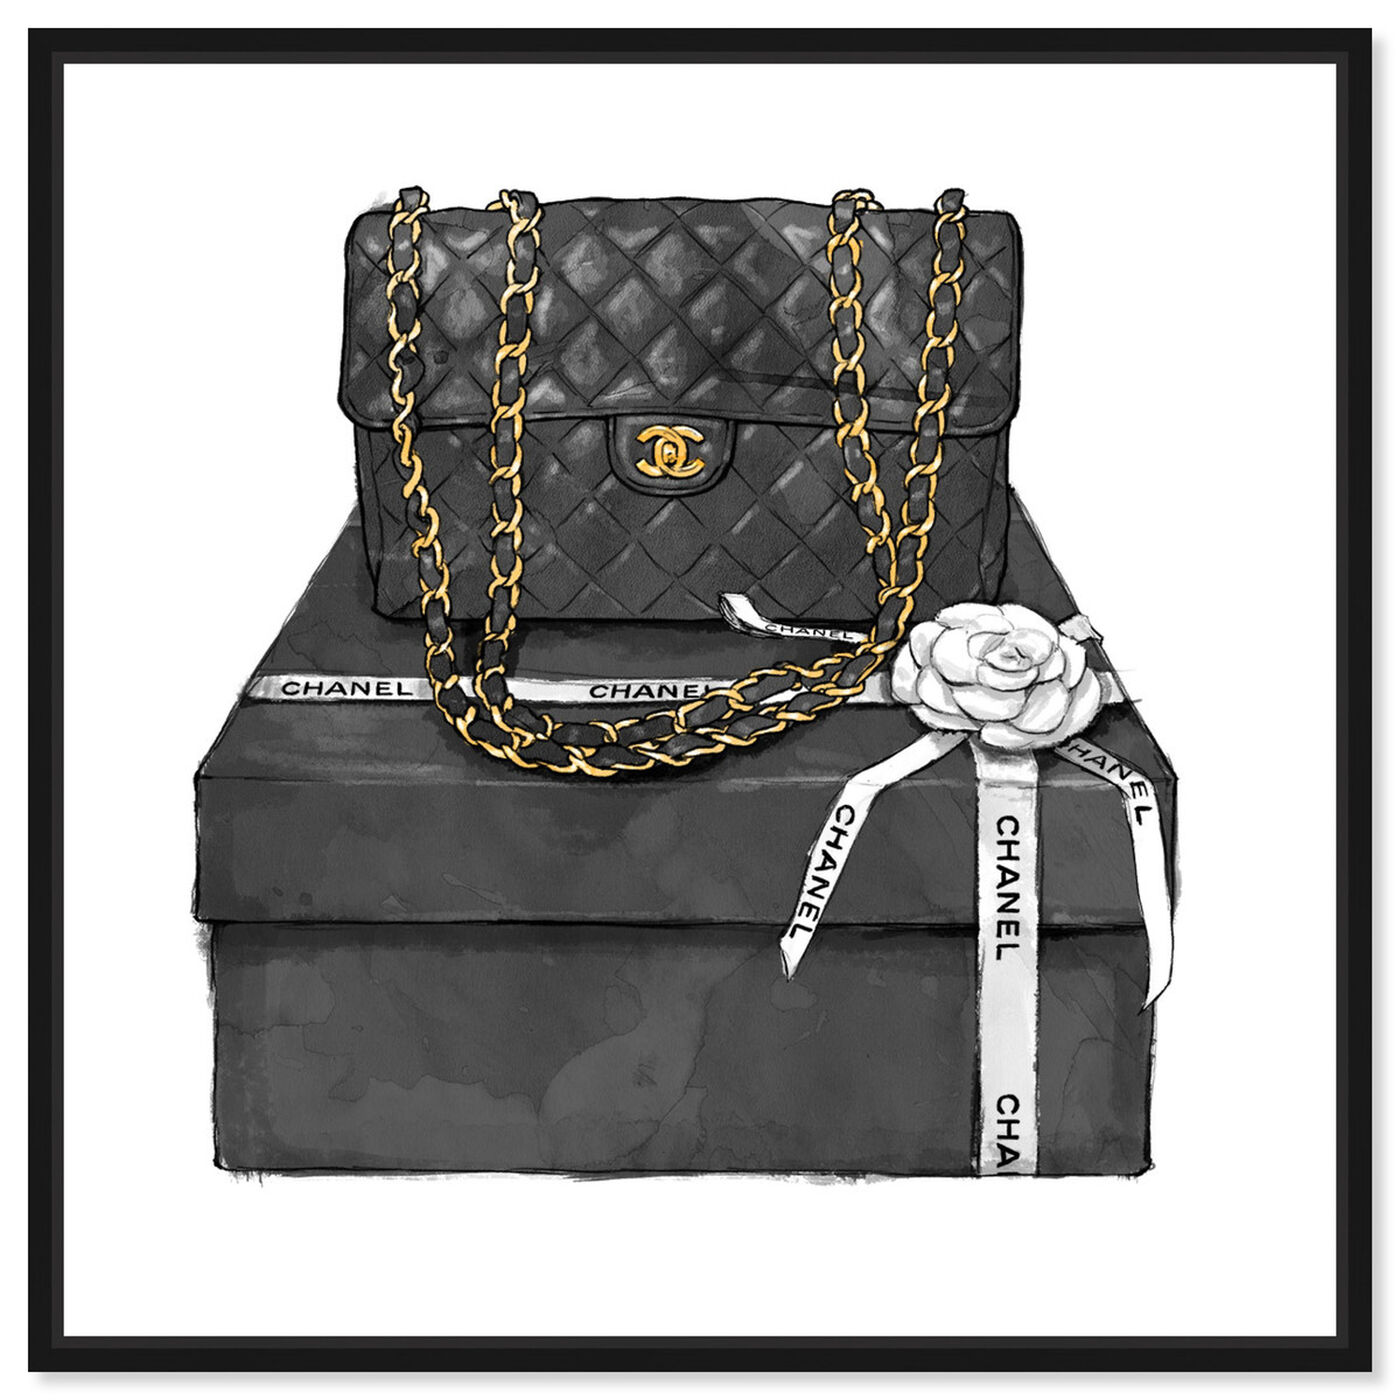 Oliver Gal 'Boxed Beauty' Fashion and Glam Wall Art Framed Canvas Print Handbags - Black, Gold - 40 x 40